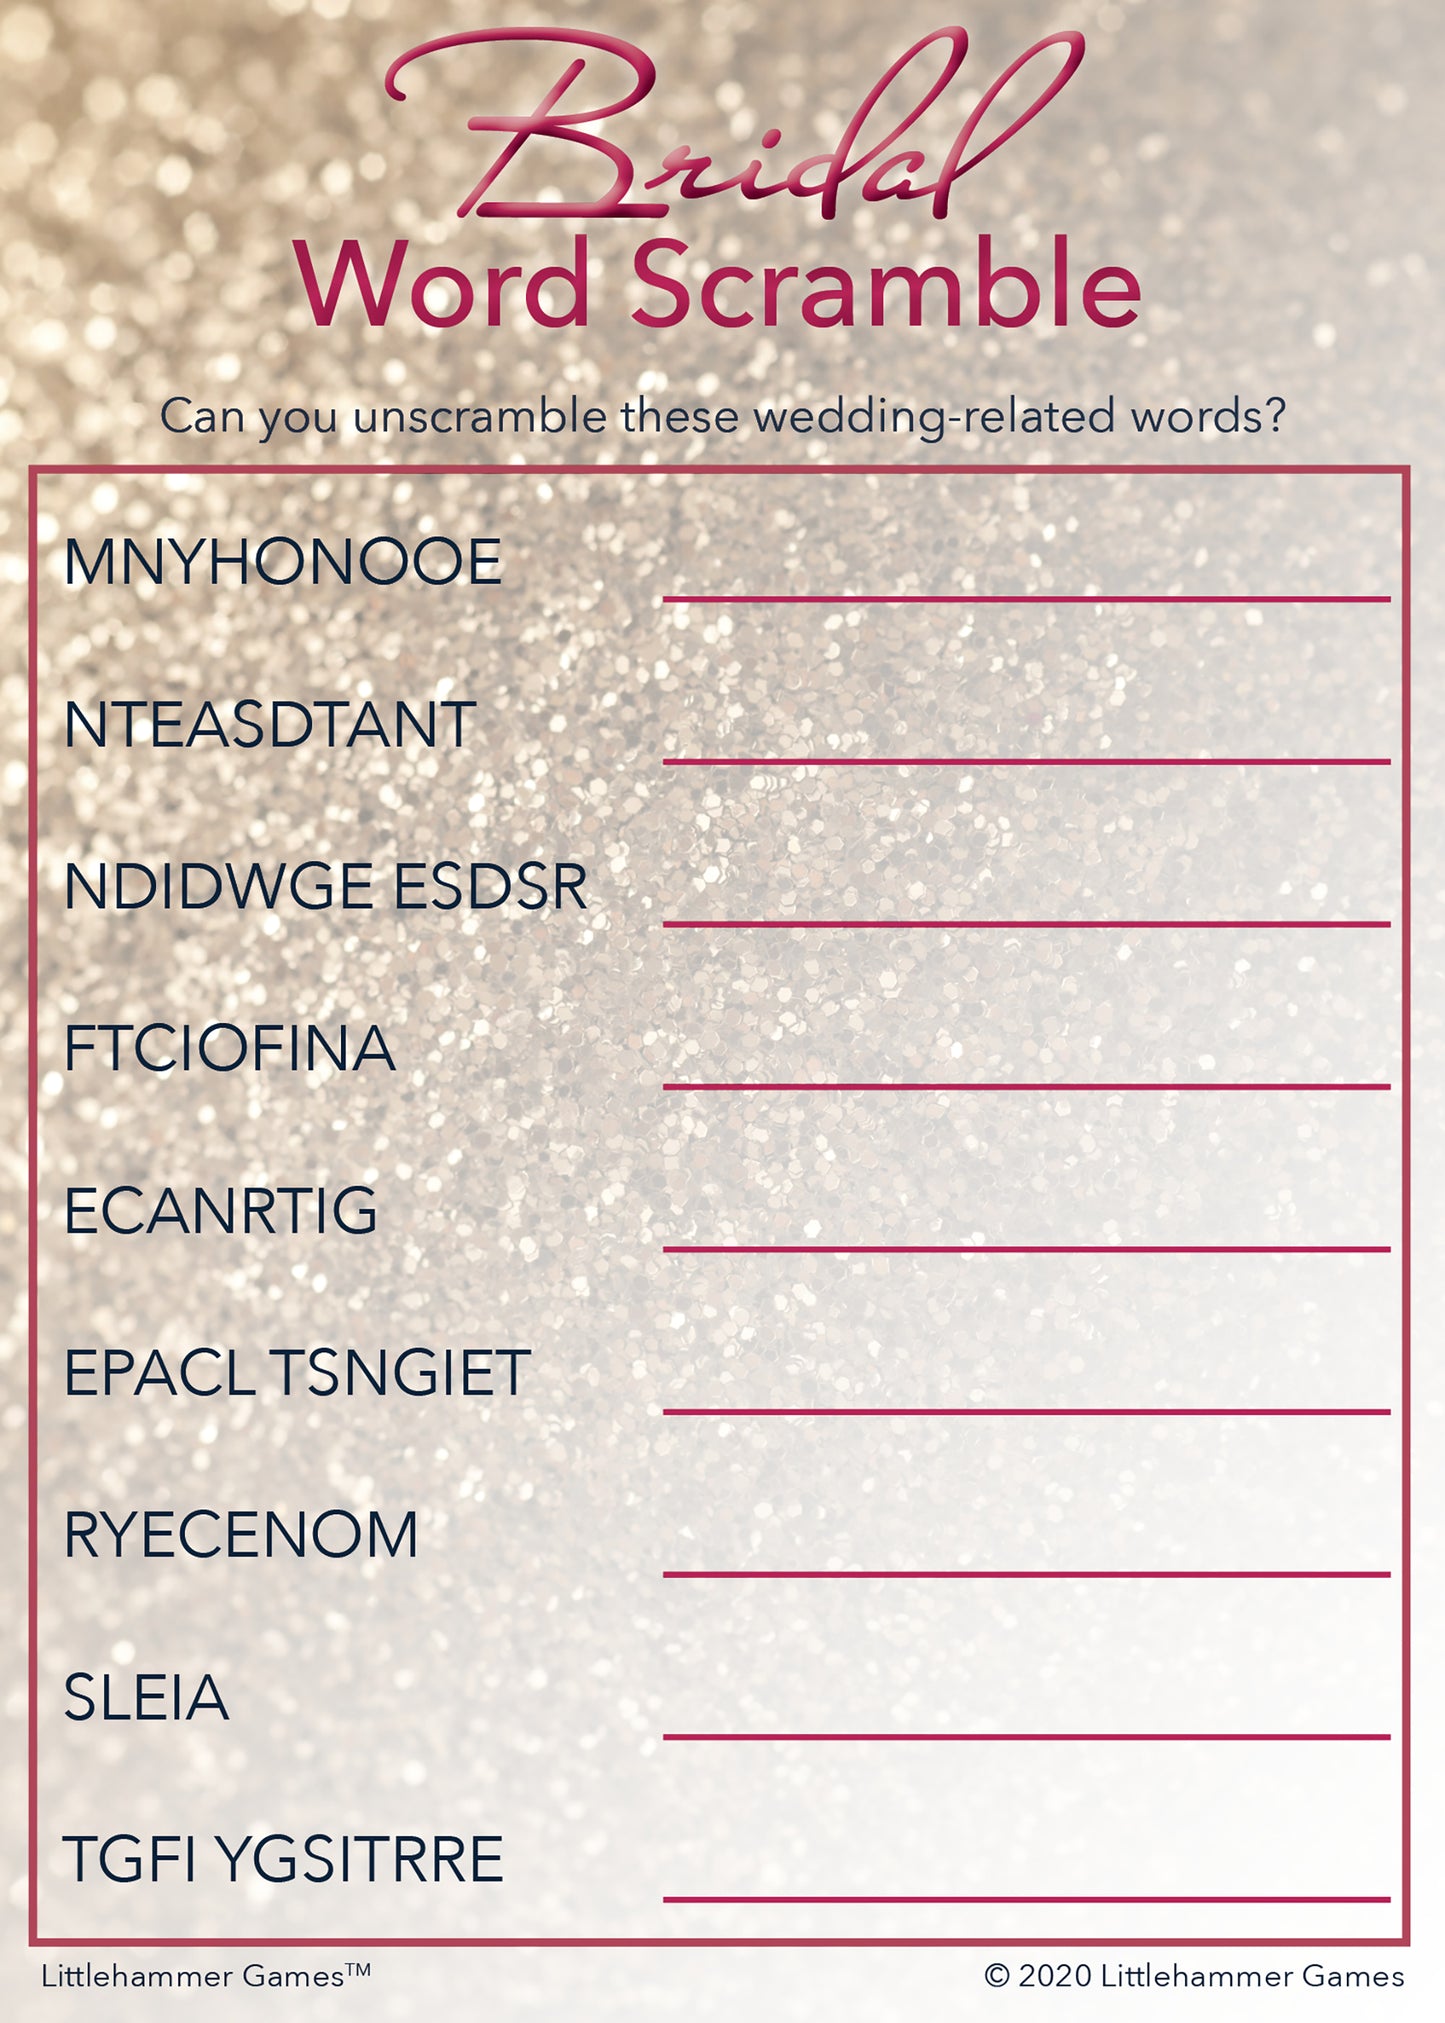 Bridal Word Scramble game card with a glittery rose gold background